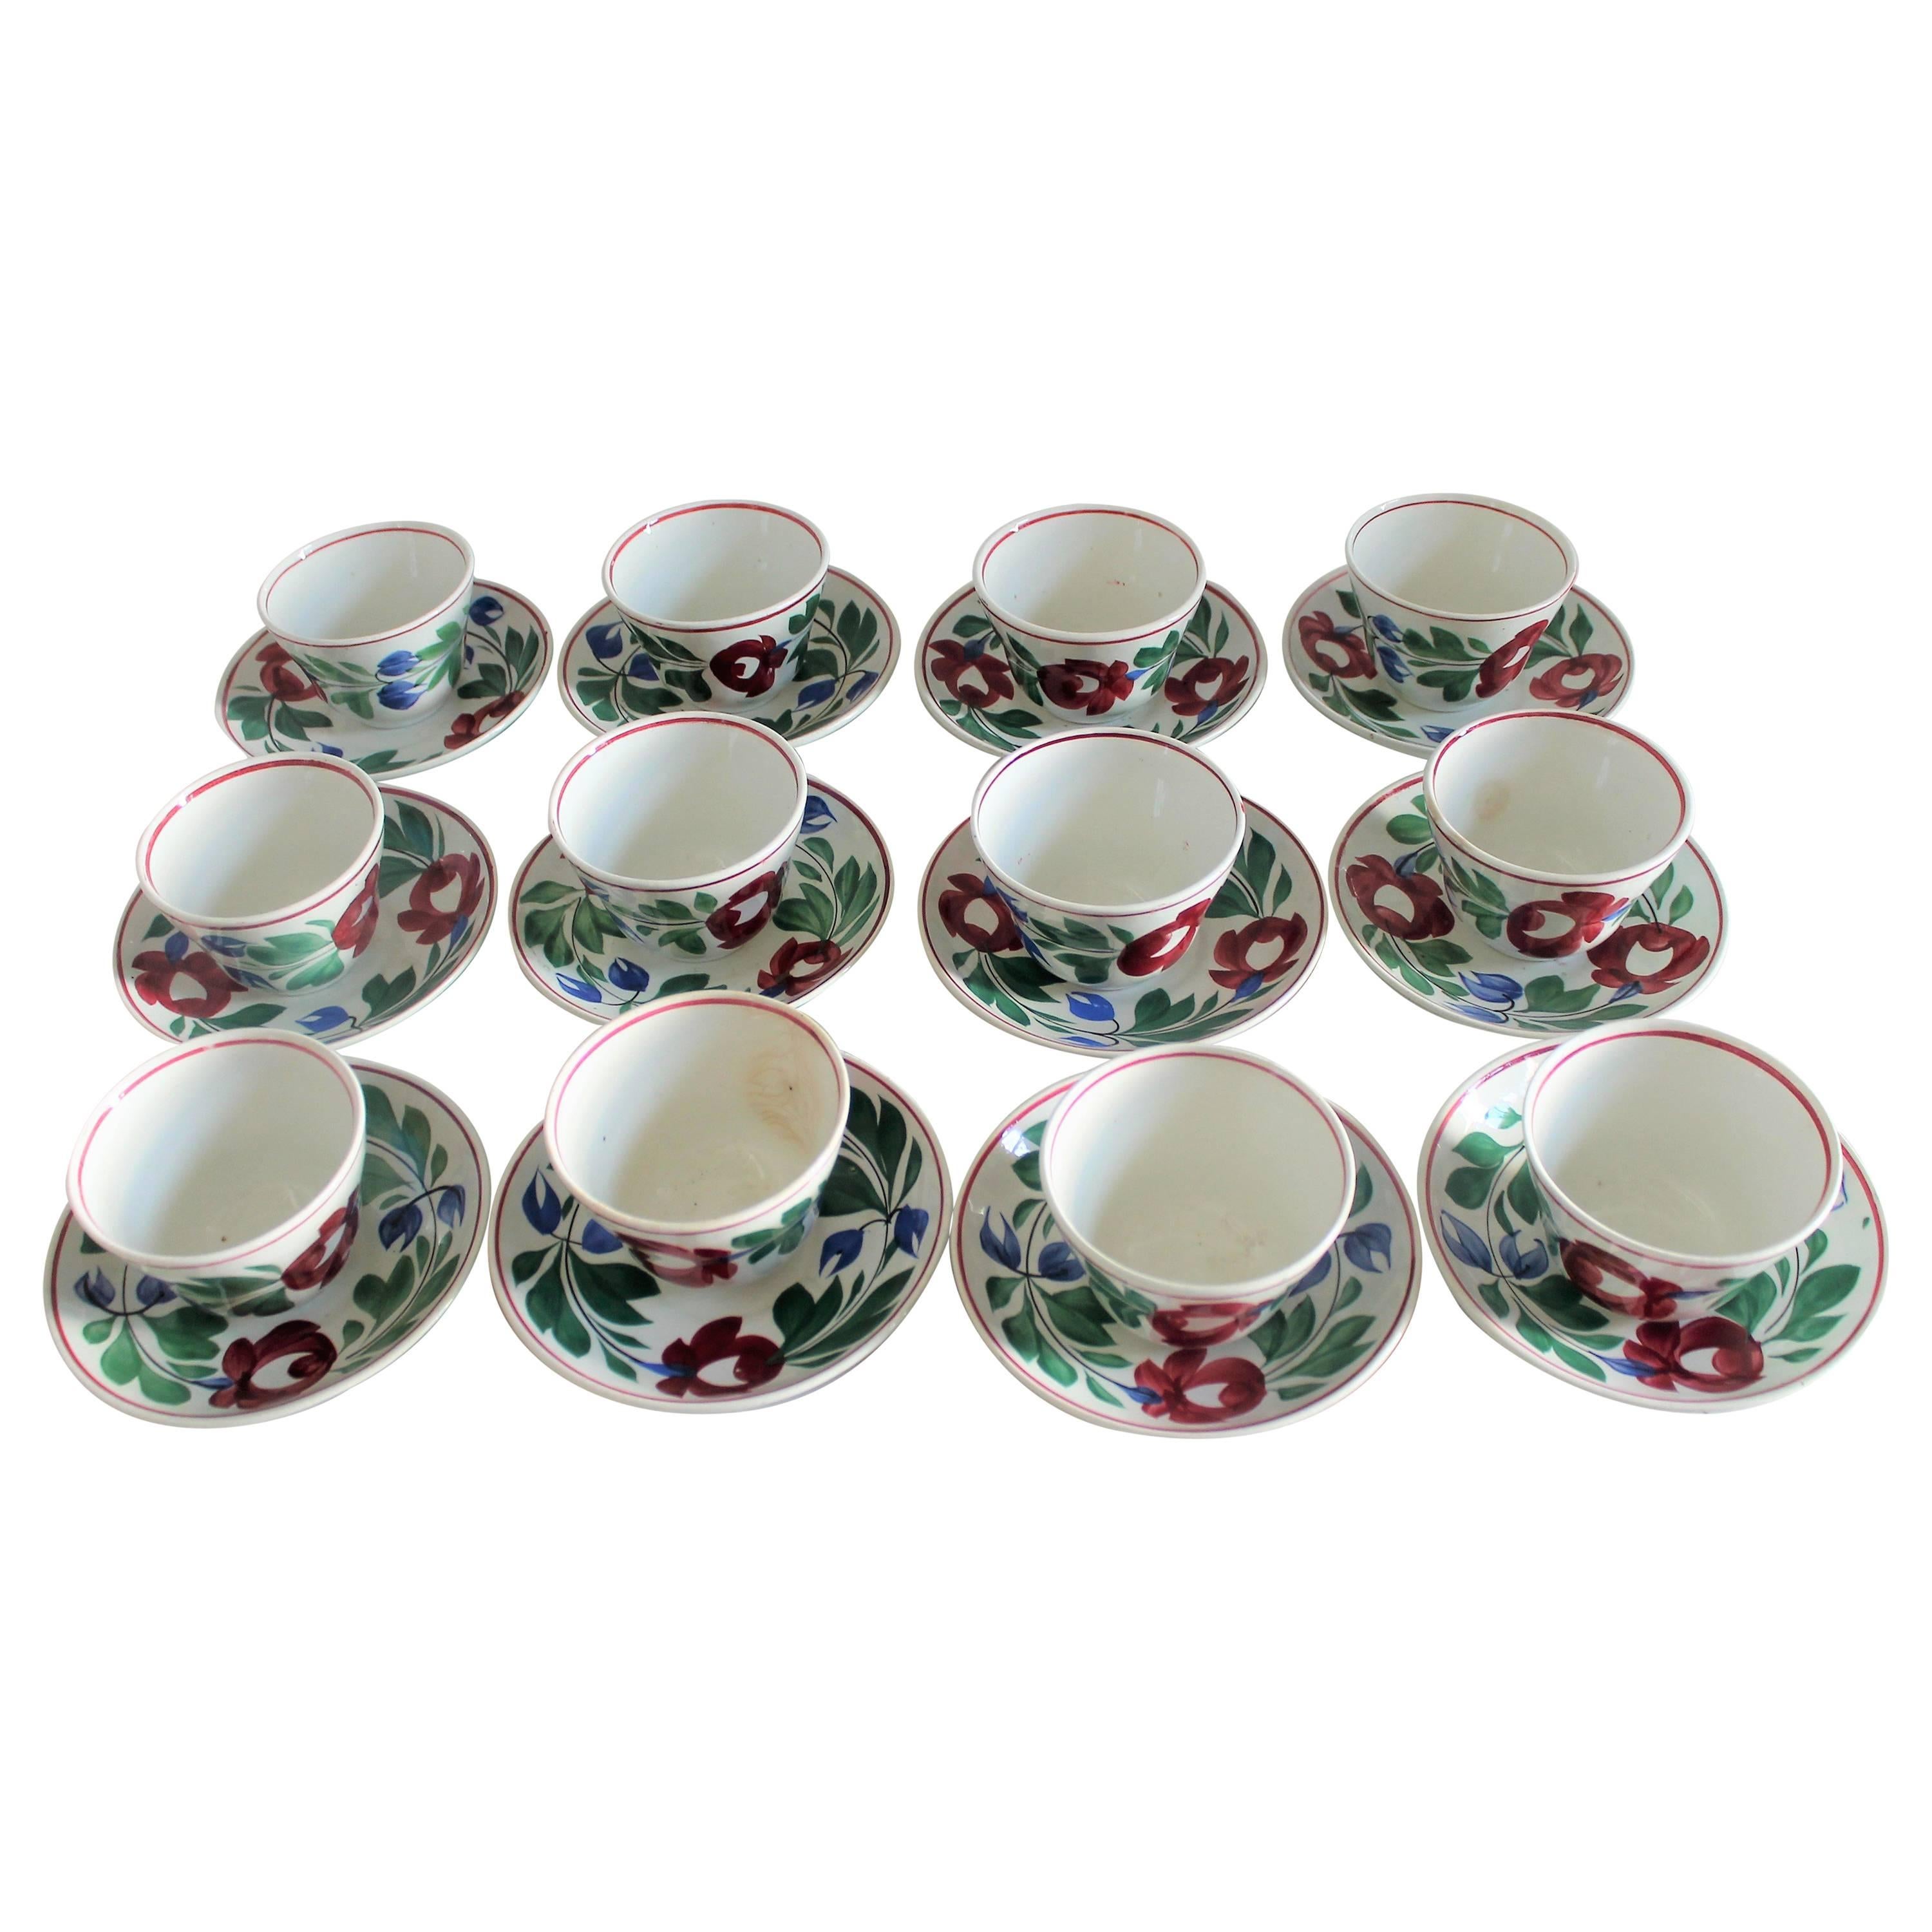 Set of Twelve 19th Century Adams Rose Pattern Cups and Saucers